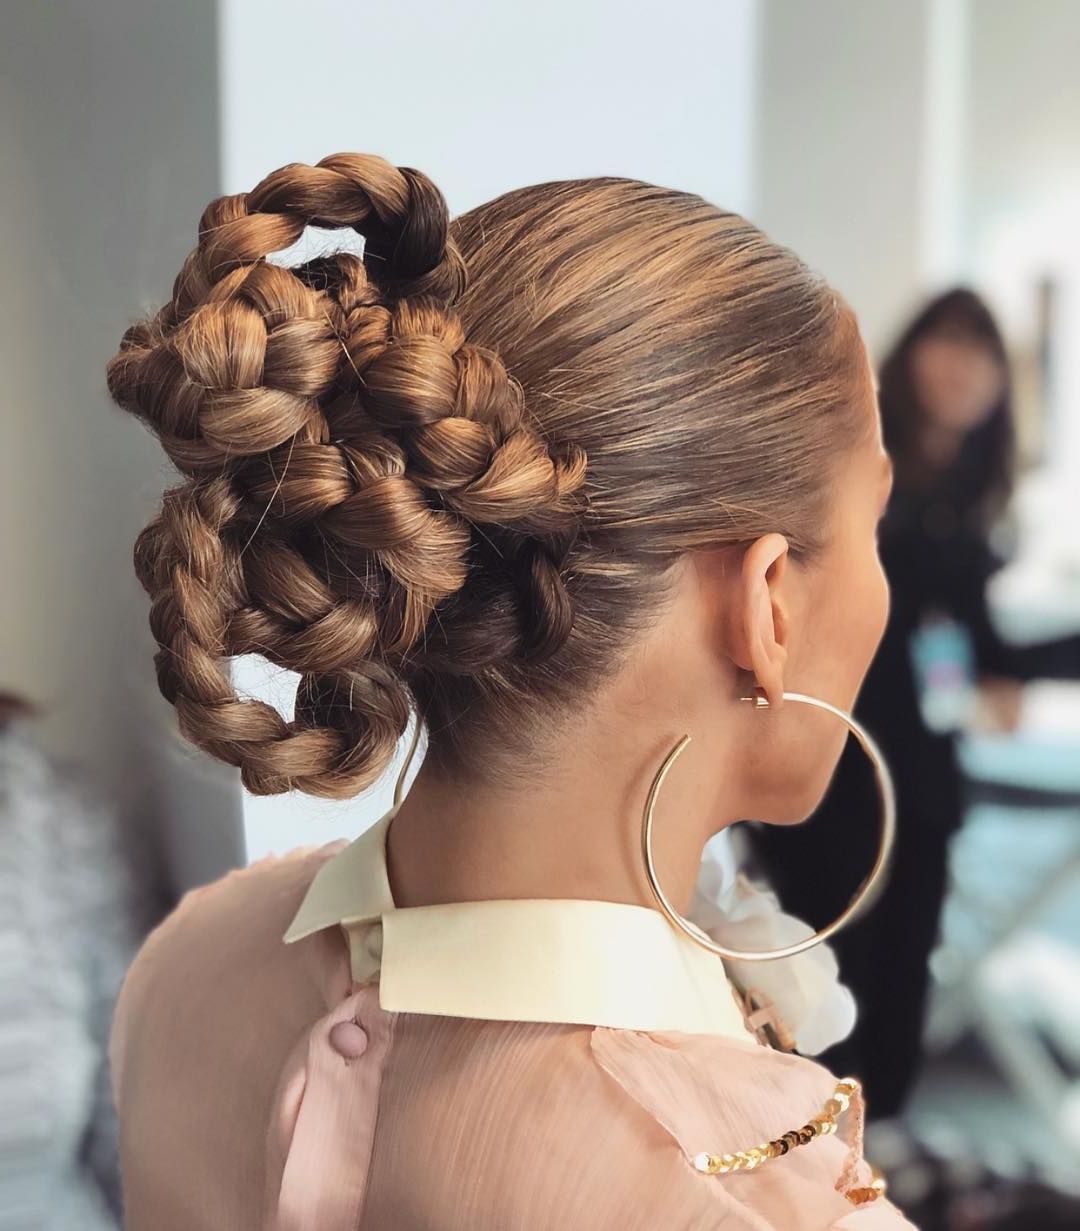 20 Braided Updo Hairstyles – Pictures Of Pretty Updos With Braids Intended For Braided Updo For Long Hair (View 22 of 25)